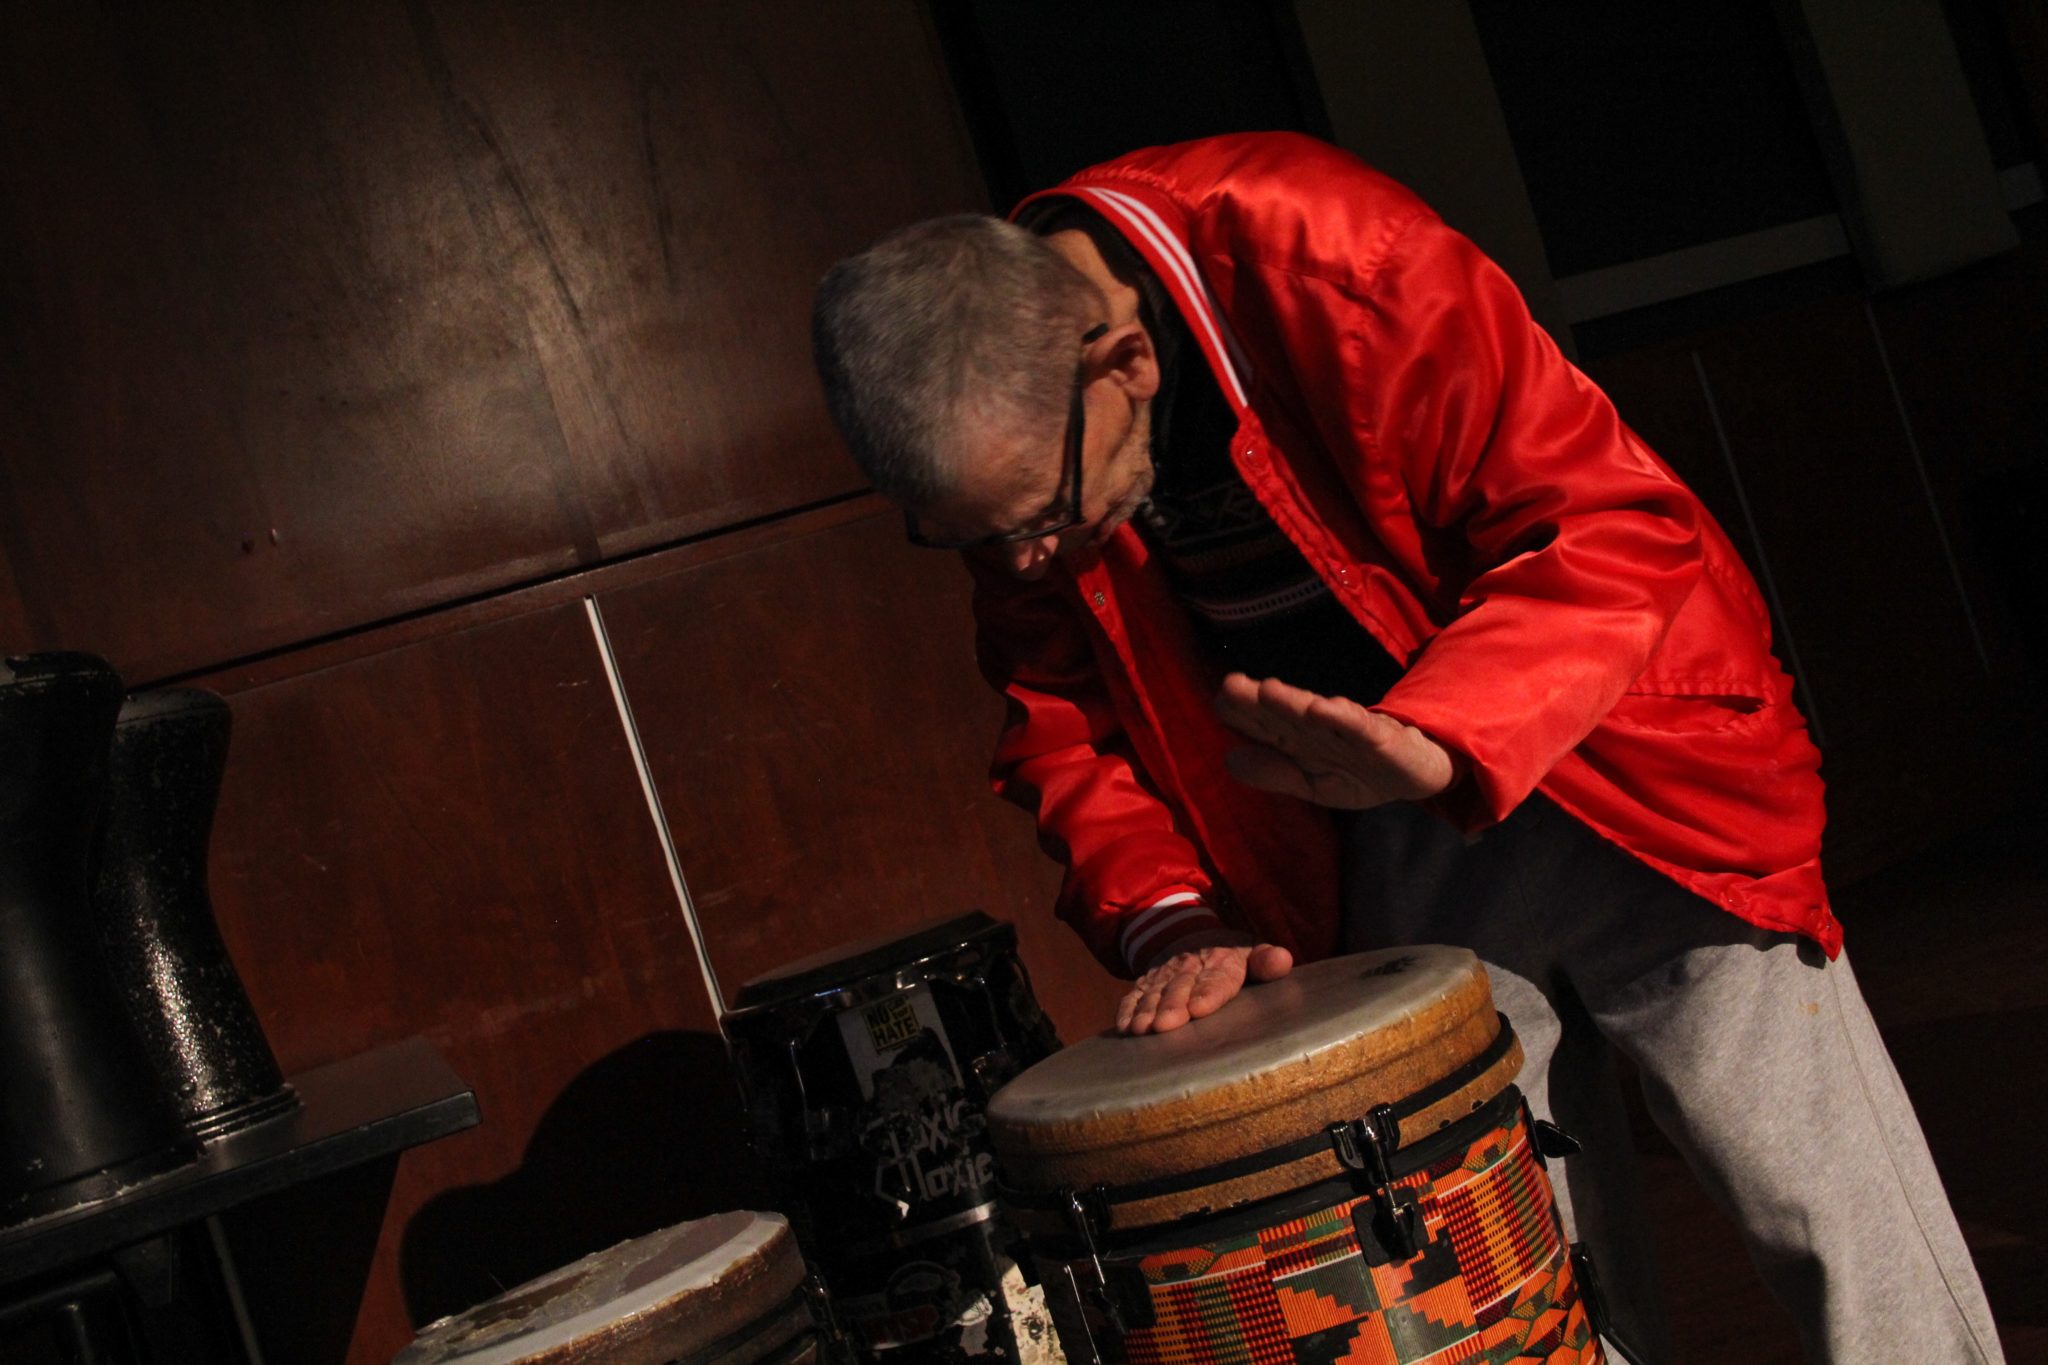 A man wearing a bright red jacket beats on a large drum.